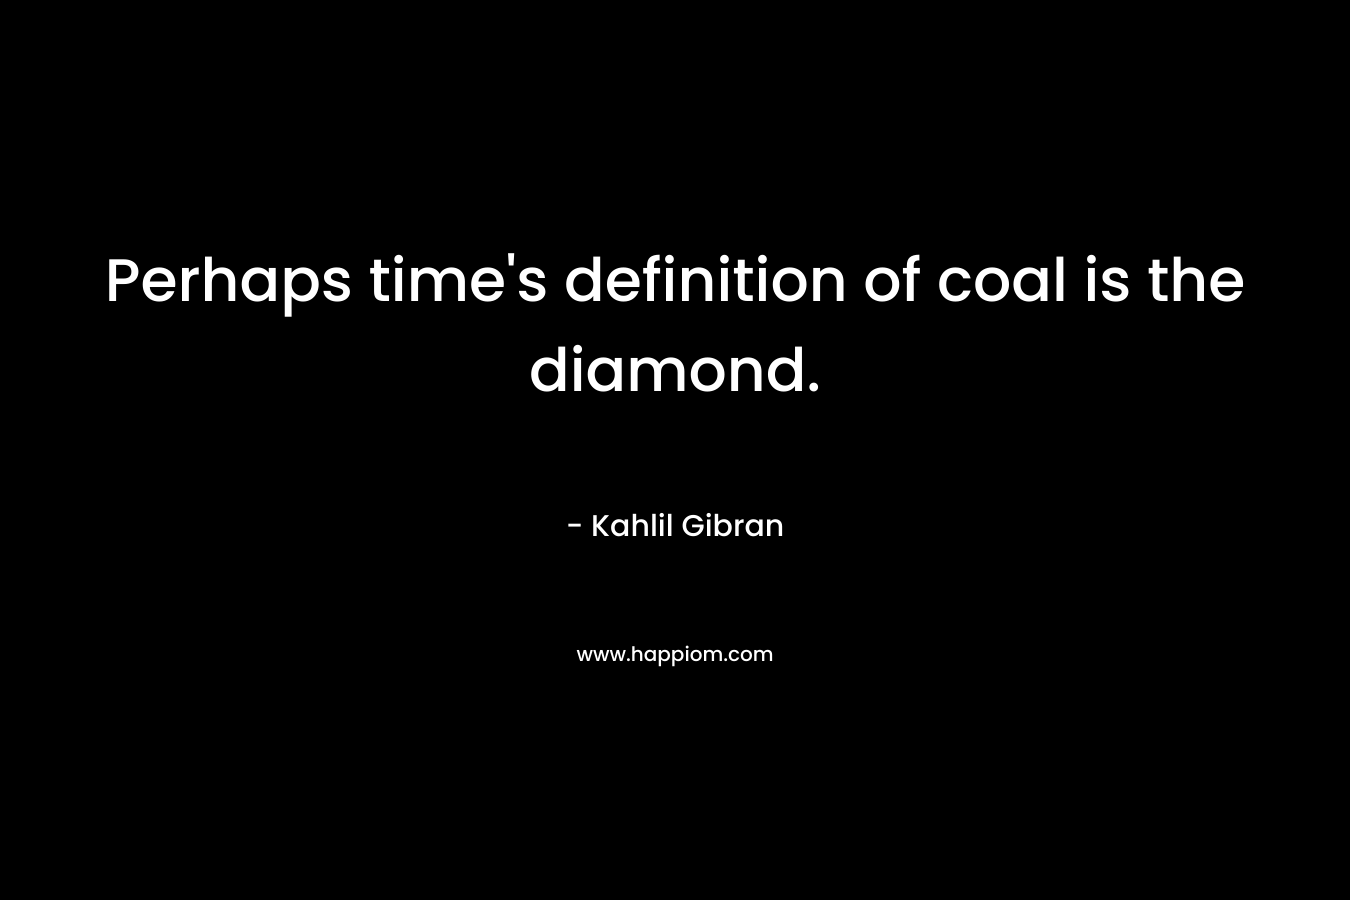 Perhaps time's definition of coal is the diamond.